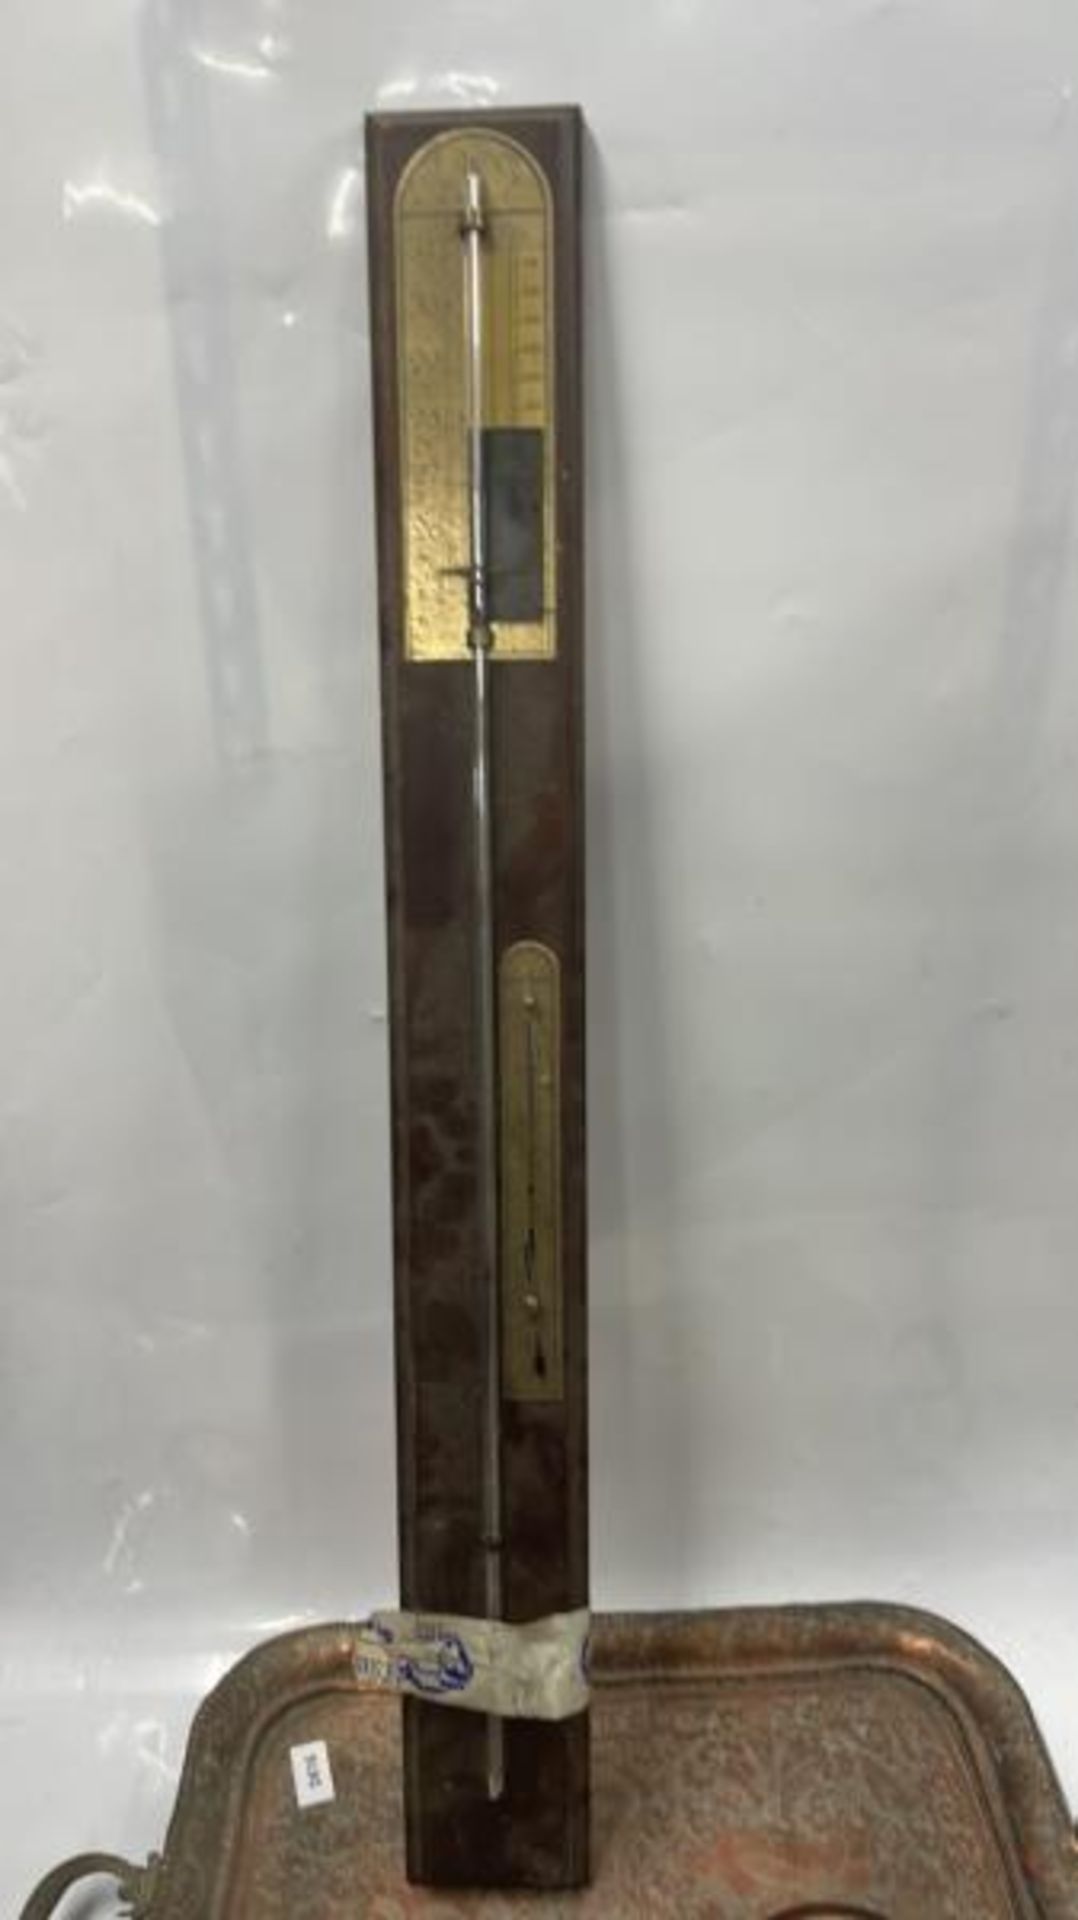 SMALL ANEROID BAROMETER, STICK BAROMETER, EASTERN ENGRAVED COPPER TRAY - Image 2 of 4